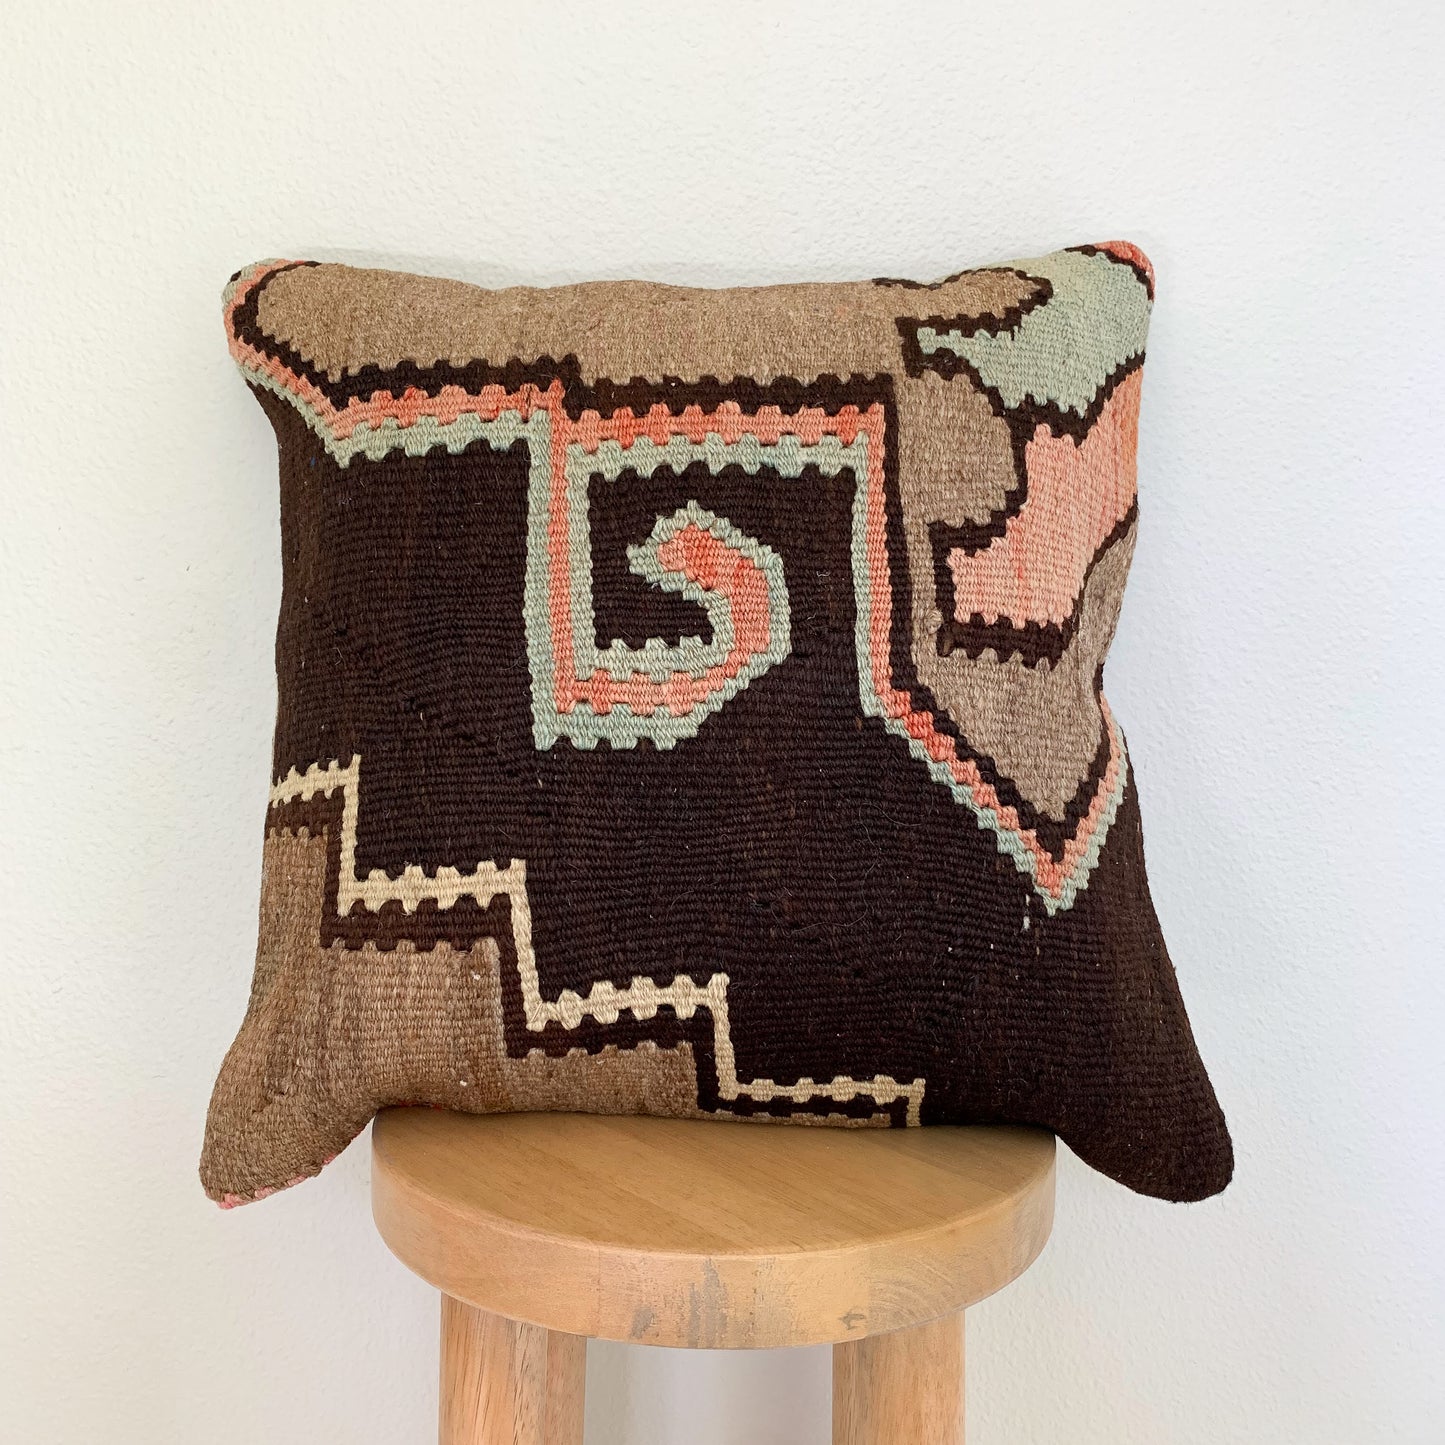 Michelle - 16" x 16" Rug Pillow Cover